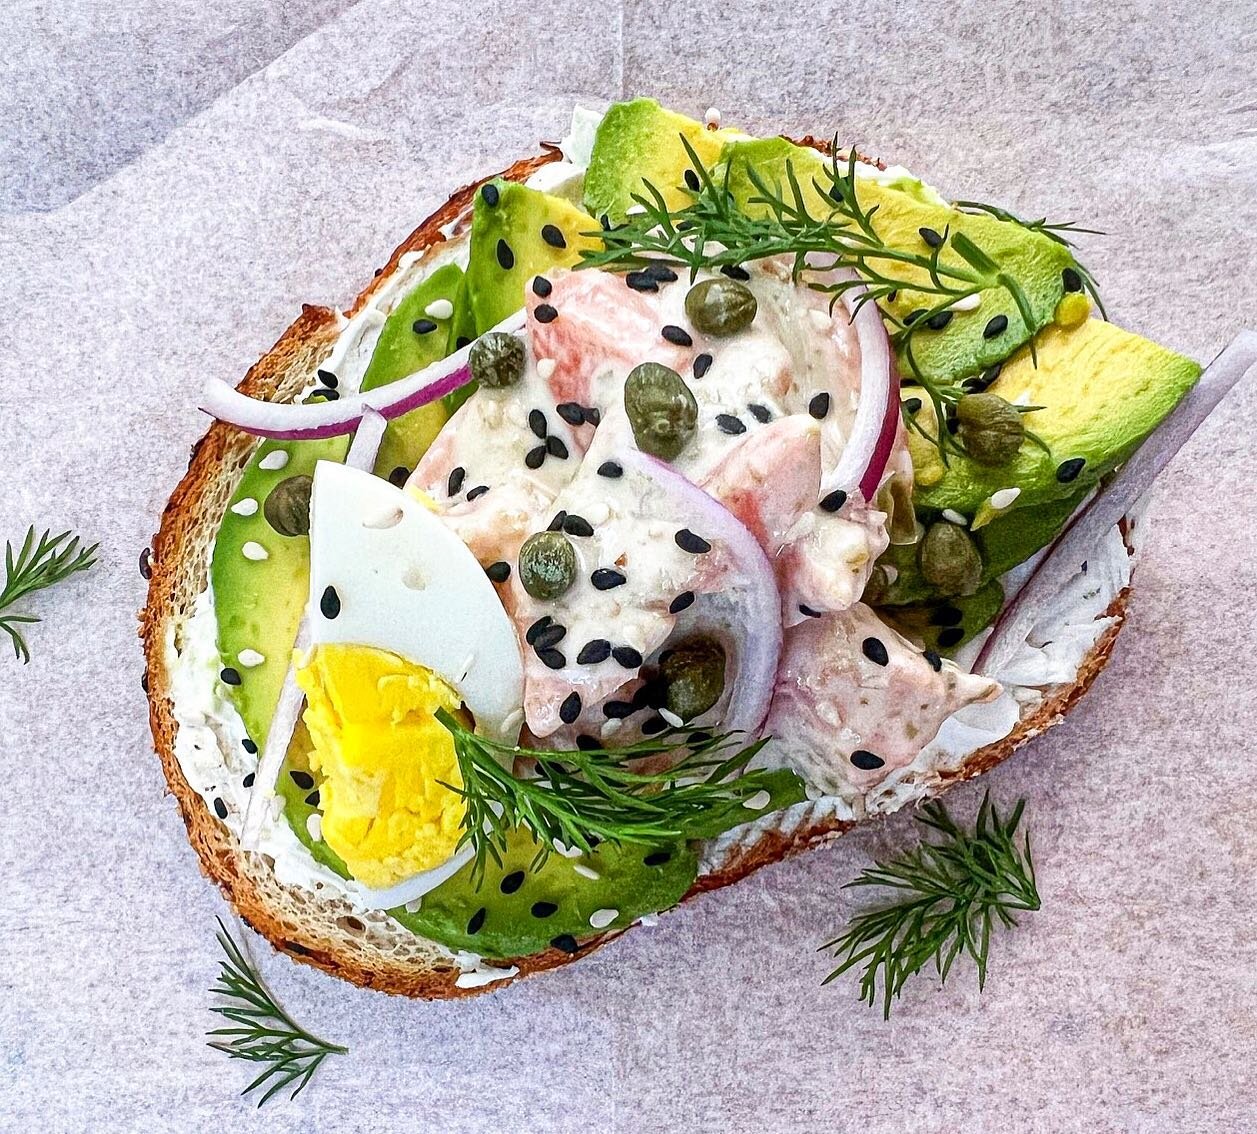 💐𝙈𝙤𝙩𝙝𝙚𝙧&rsquo;𝙨 𝘿𝙖𝙮 𝙎𝙥𝙚𝙘𝙞𝙖𝙡 💐

@pokekaiofficial is bringing out their Salmon Avocado Toast special today for all the moms out there! (Well, for everyone really 😜) 🥑🐟🍞